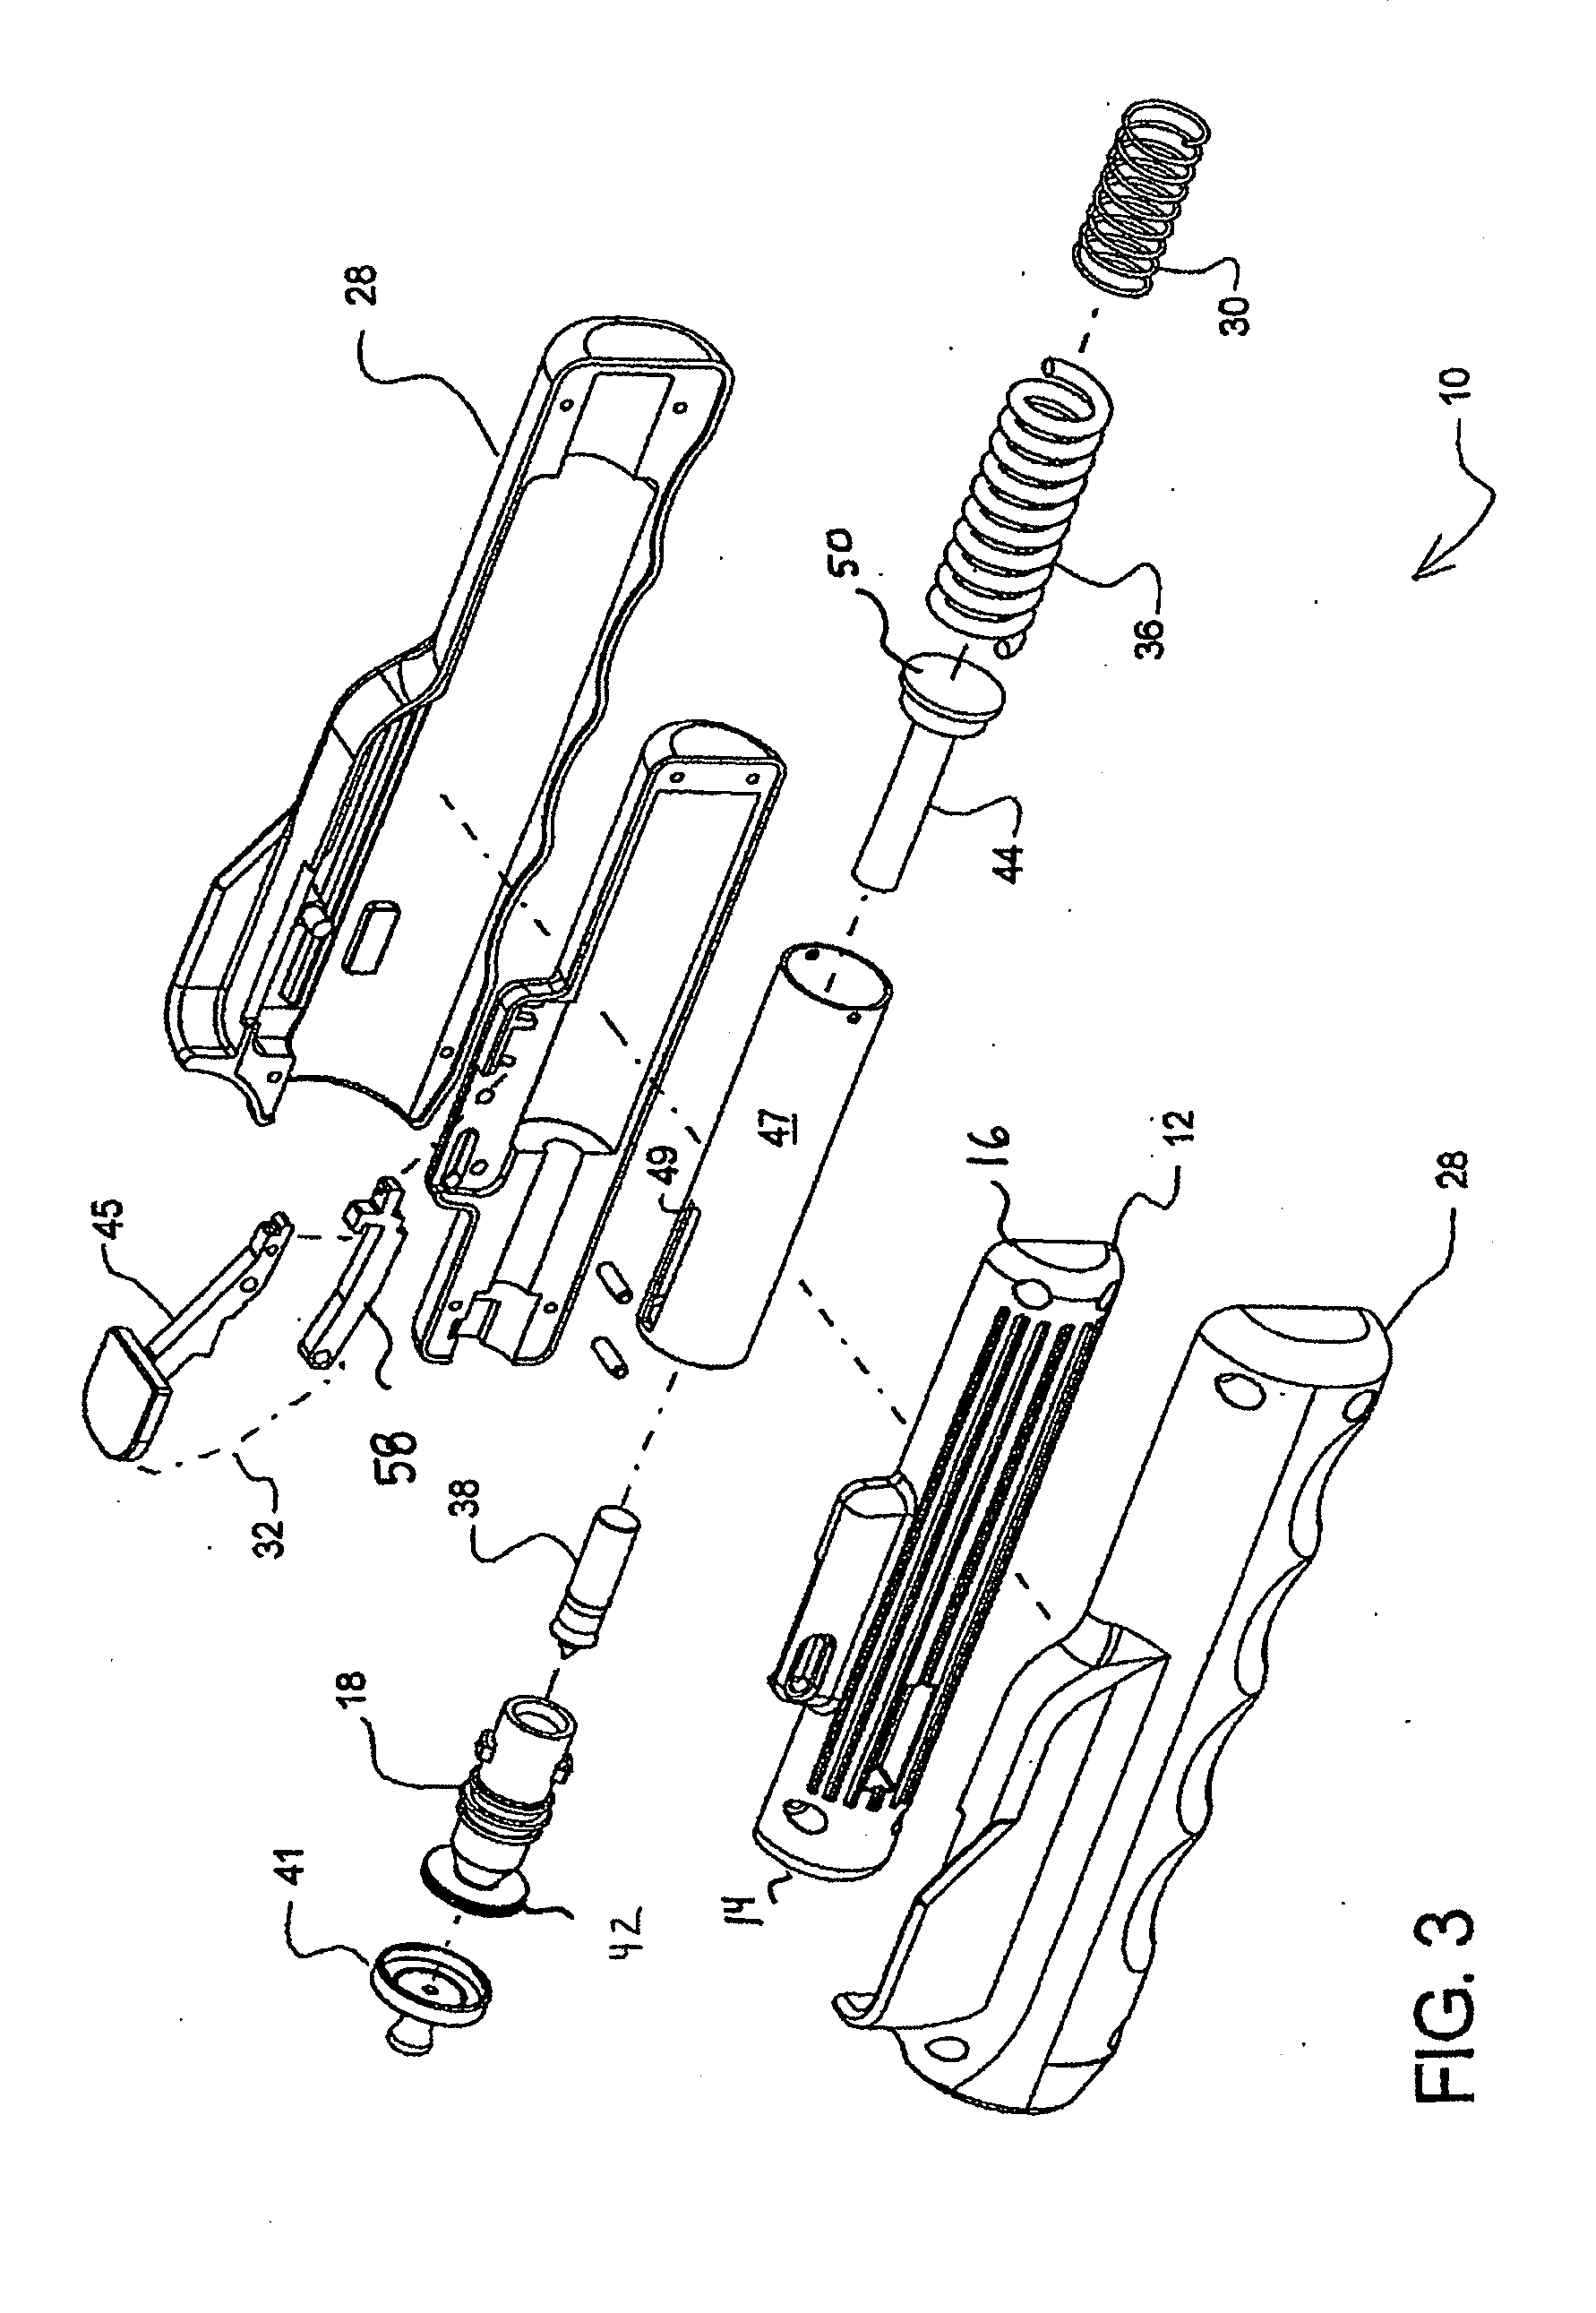 Needle-less injector and method of fluid delivery